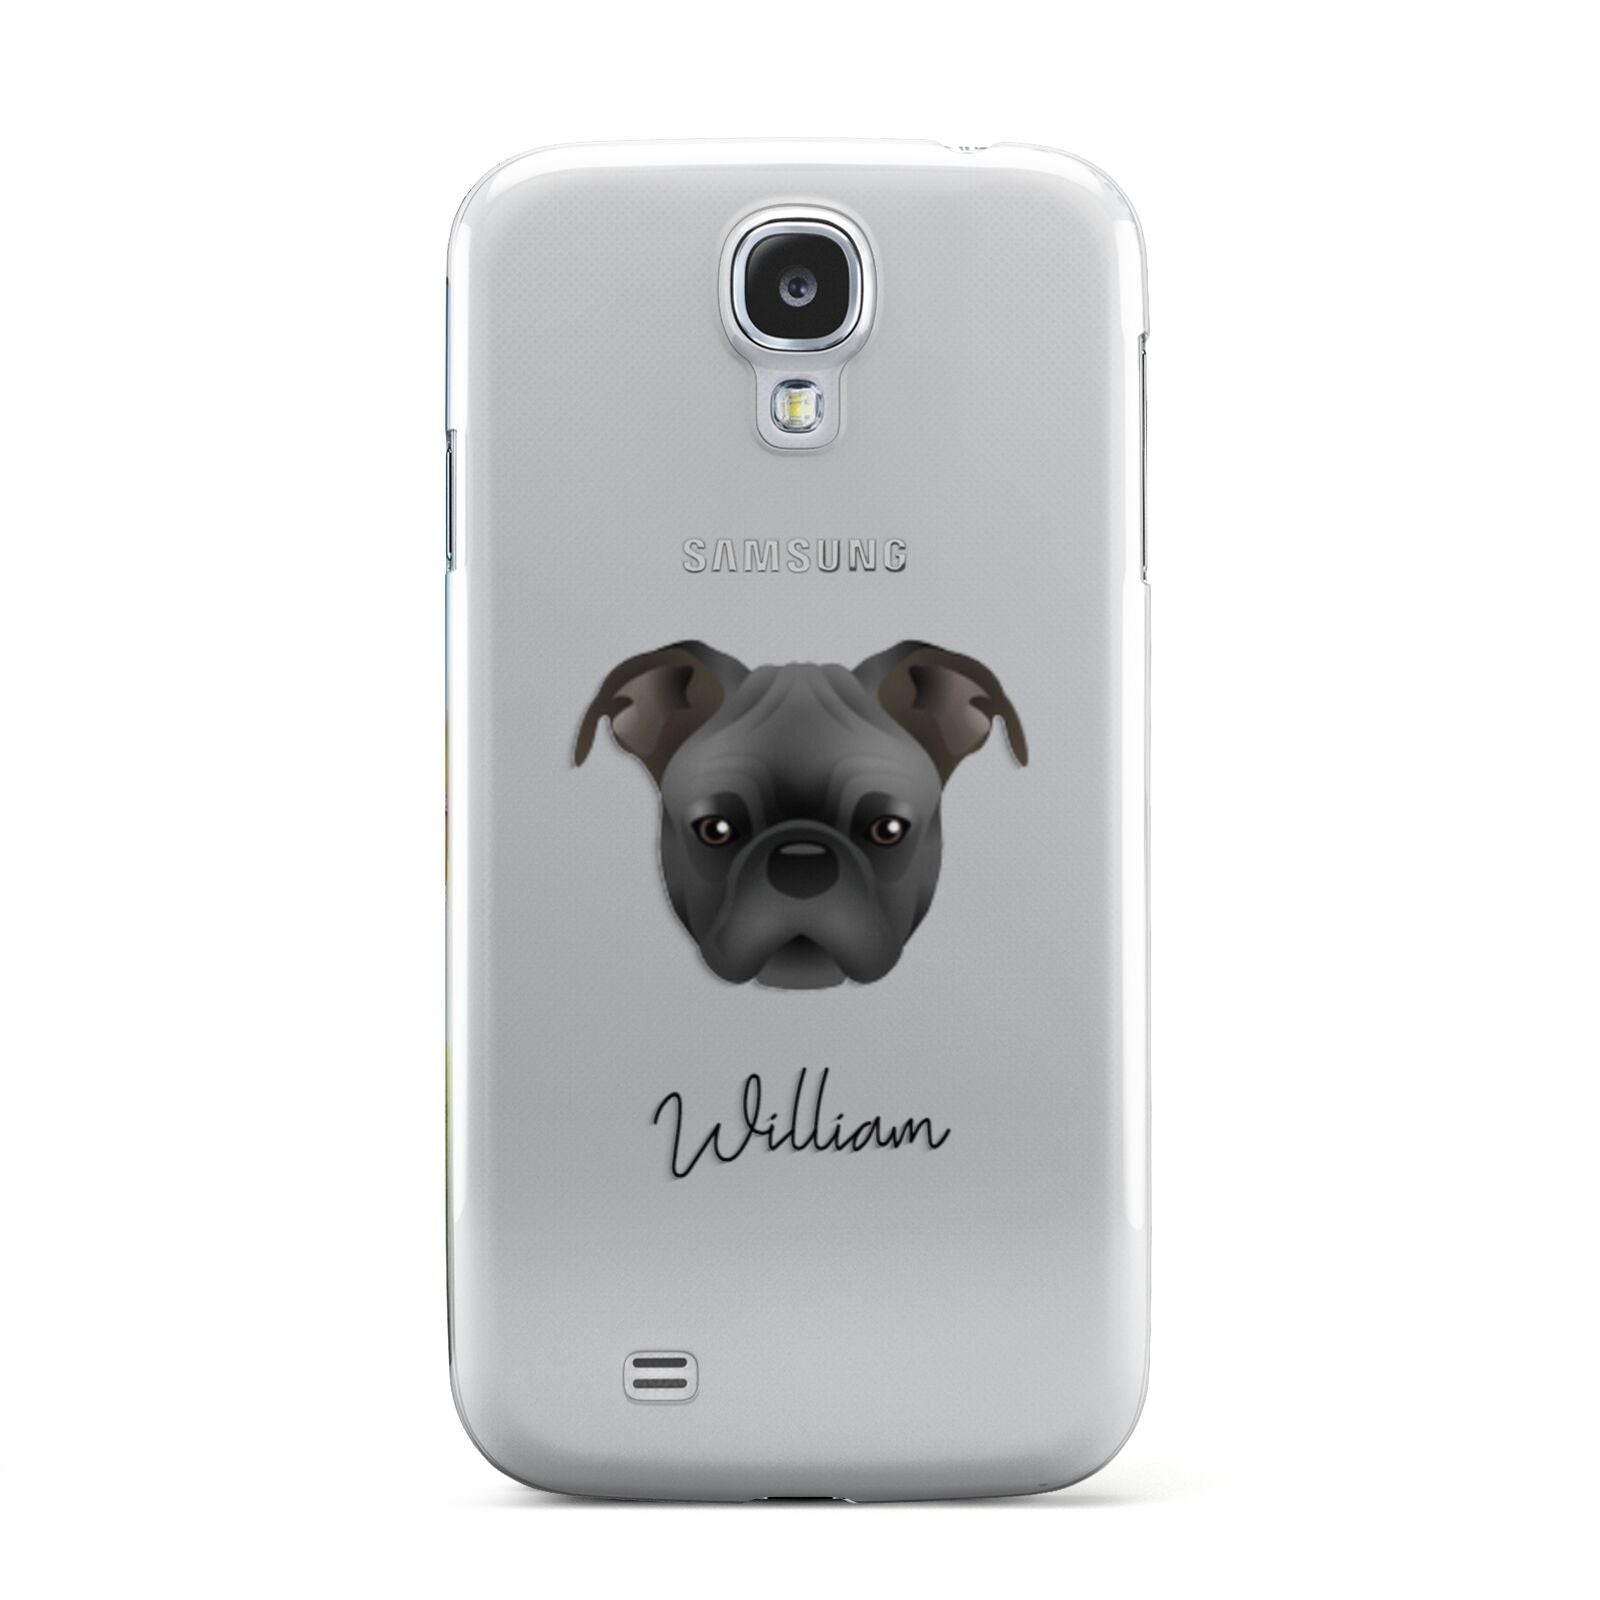 Bugg Personalised Samsung Galaxy S4 Case